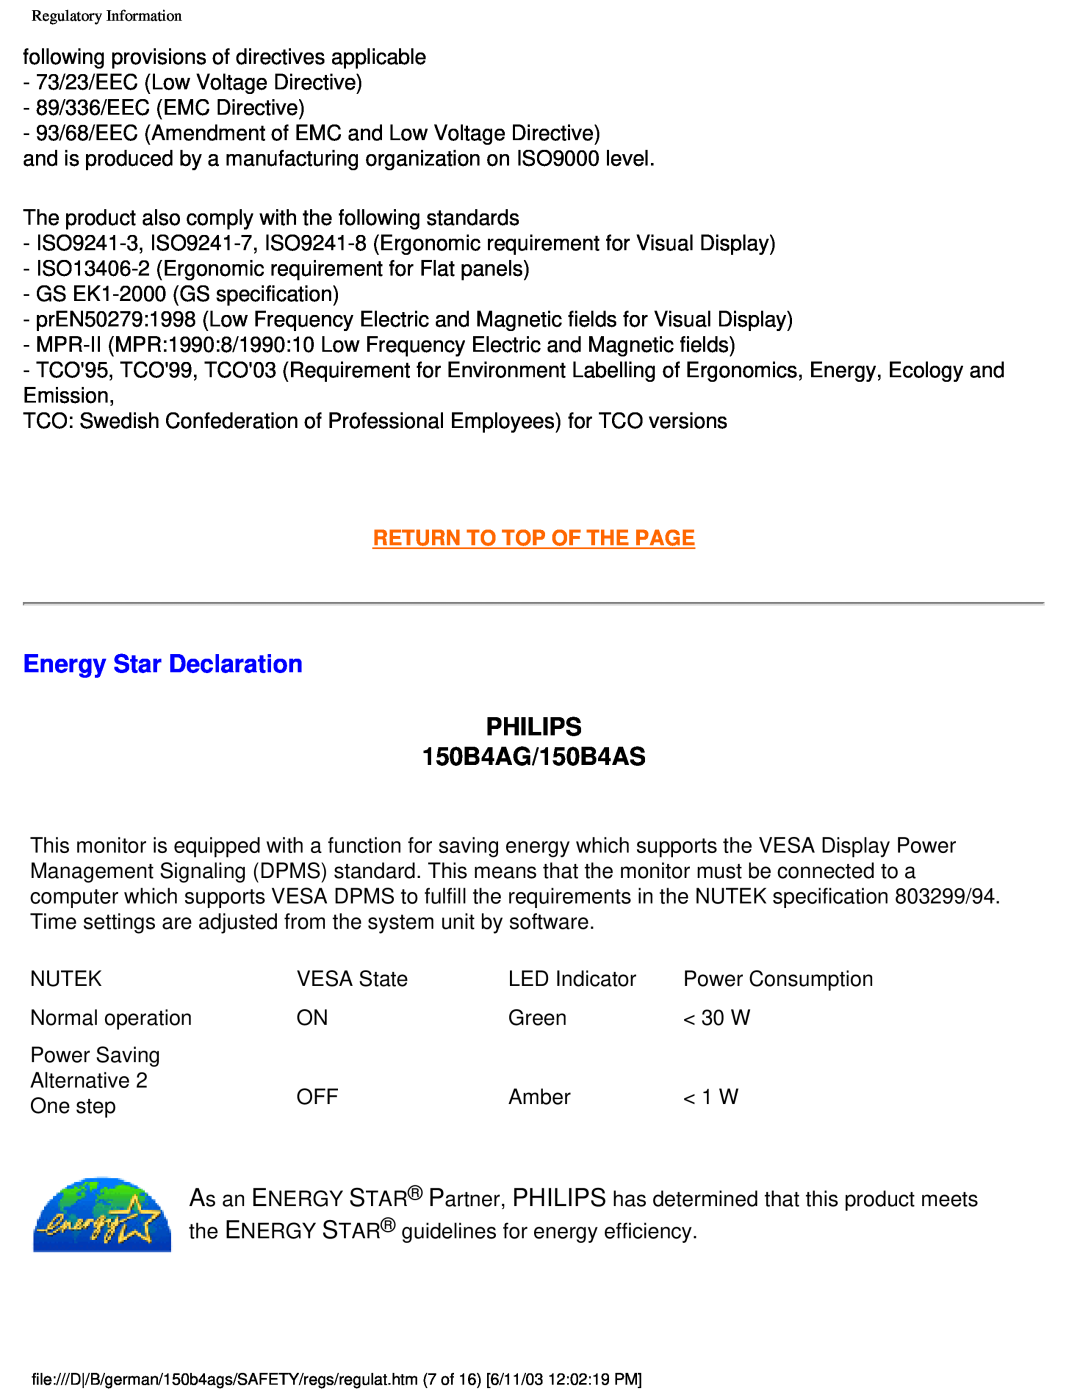 Philips user manual Energy Star Declaration, PHILIPS 150B4AG/150B4AS, Return To Top Of The Page 